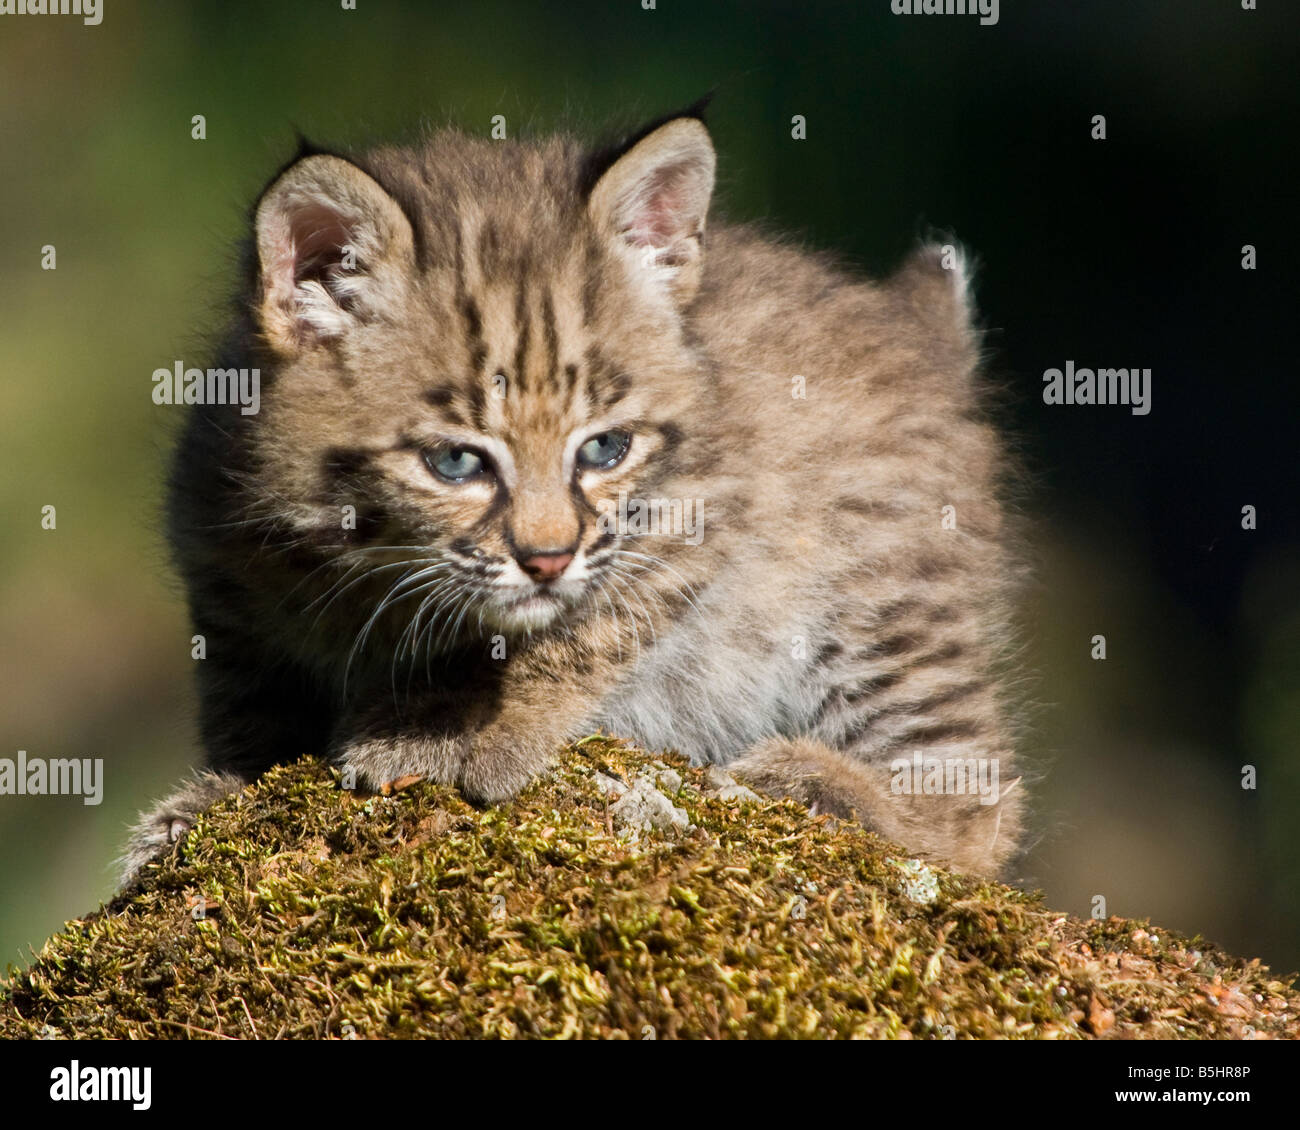 Bobcat kitten looking tough atop a moss covered rock - controlled conditions Stock Photo